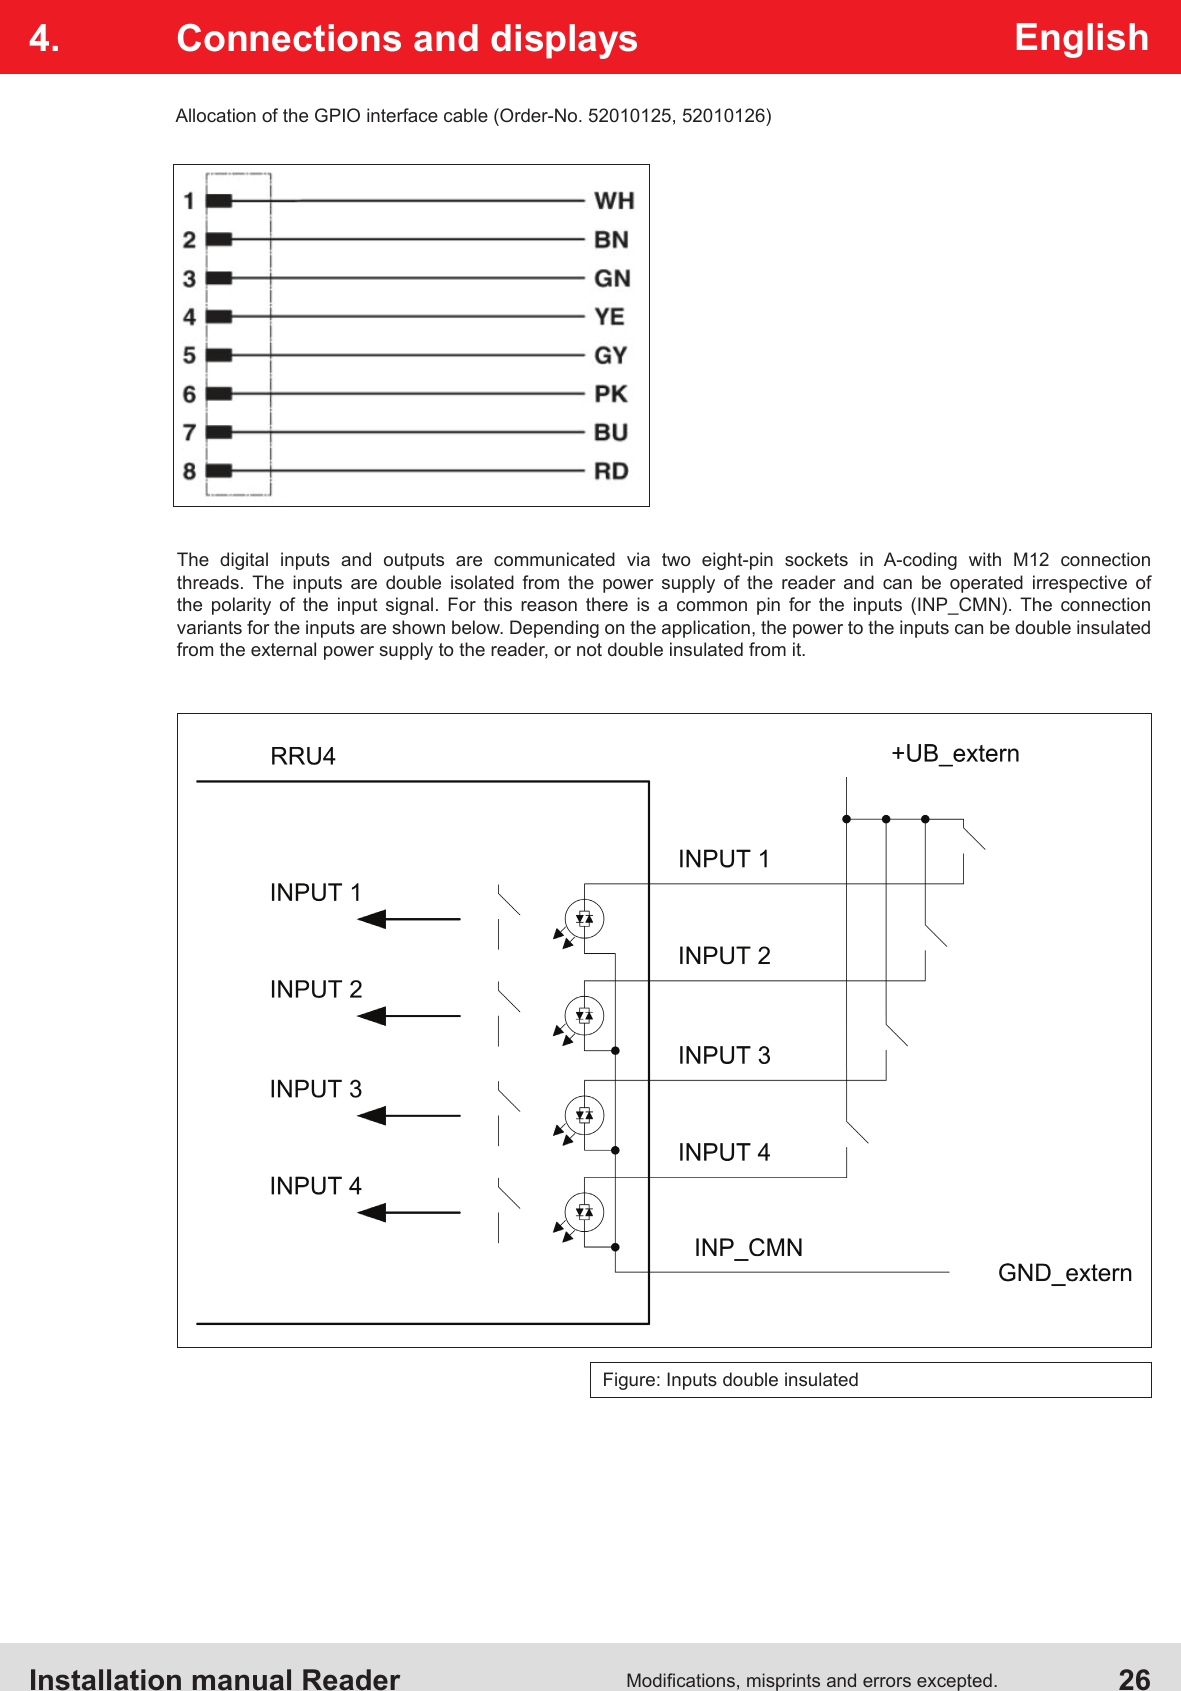 Installation manual Reader  26Modications, misprints and errors excepted.English4.  Connections and displaysAllocation of the GPIO interface cable (Order-No. 52010125, 52010126)The digital inputs and outputs are communicated via two eight-pin sockets in A-coding with M12 connection threads. The inputs are double isolated from the power supply of the reader and can be operated irrespective of the polarity of the input signal. For this reason there is a common pin for the inputs (INP_CMN). The connection variants for the inputs are shown below. Depending on the application, the power to the inputs can be double insulated  from the external power supply to the reader, or not double insulated from it.Figure: Inputs double insulated